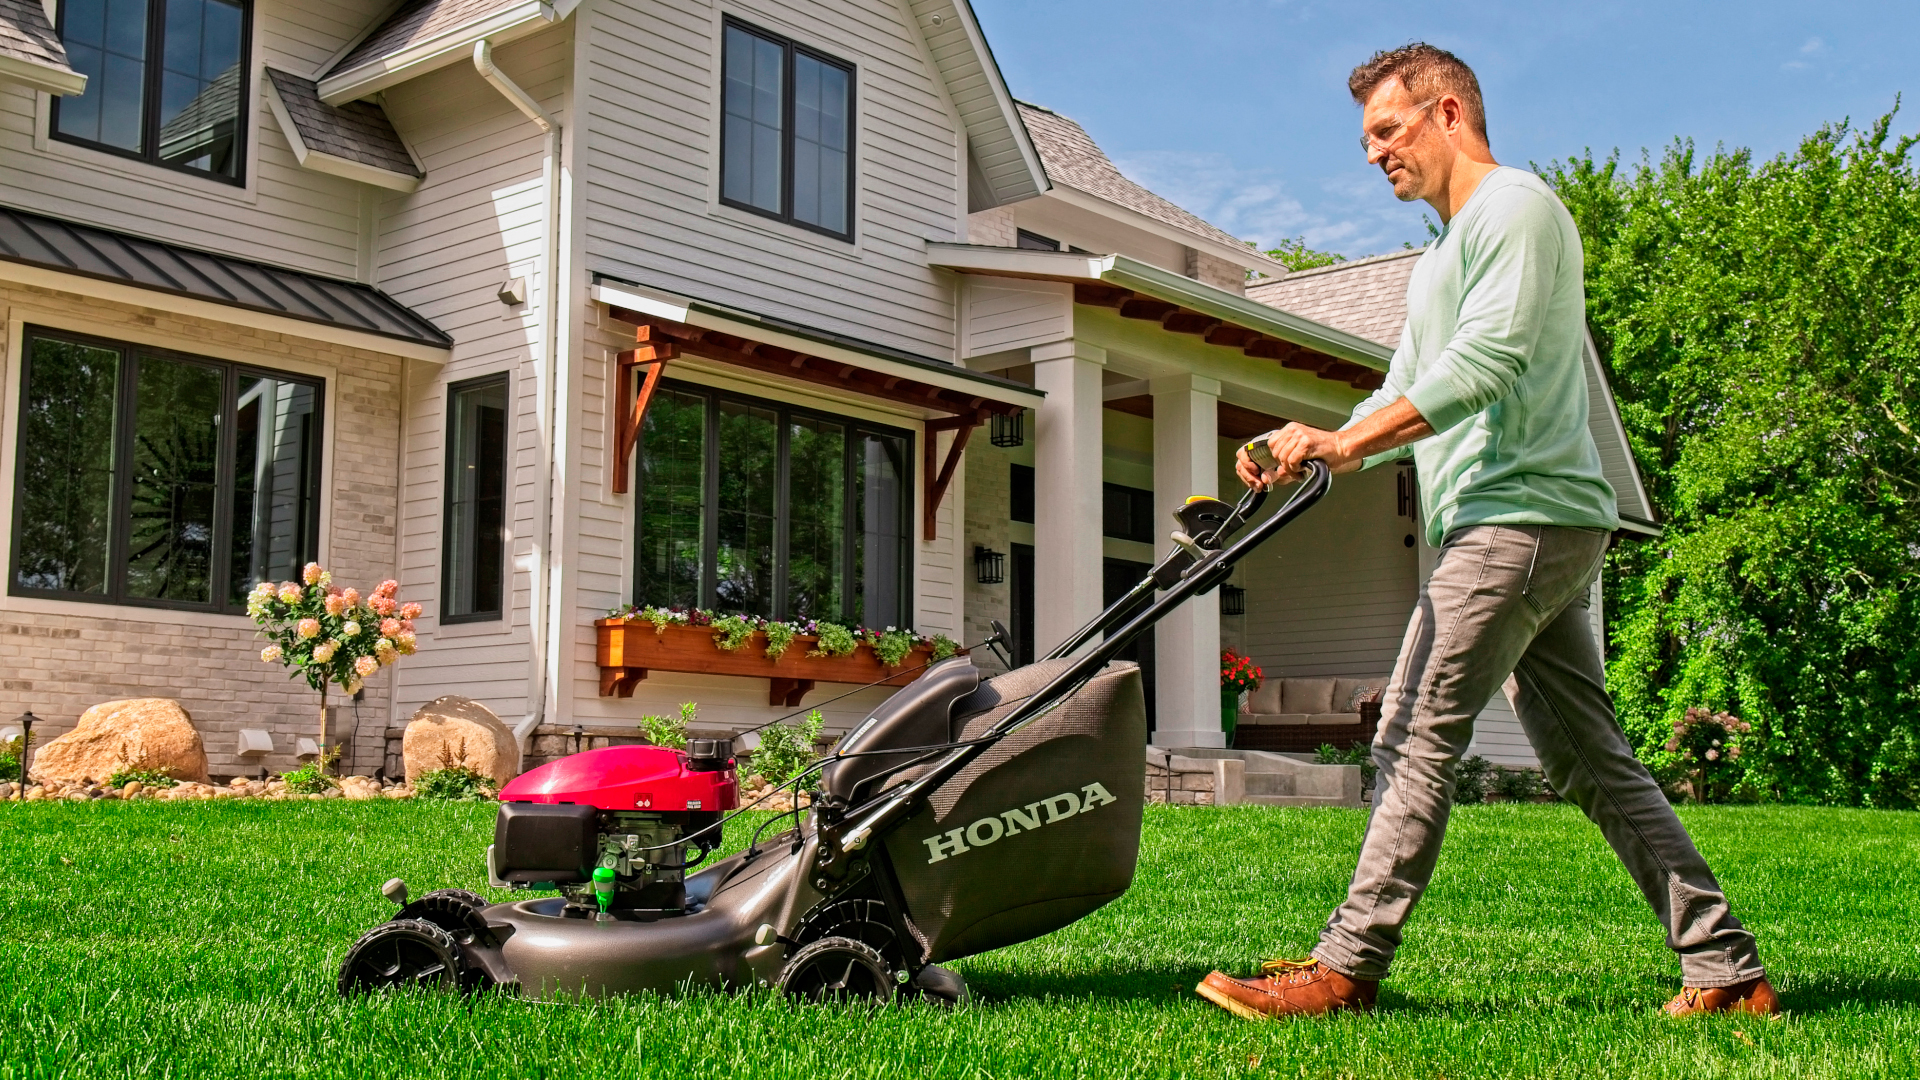 We Tested the Eco-Friendly Greenworks 25022 Lawn Mower